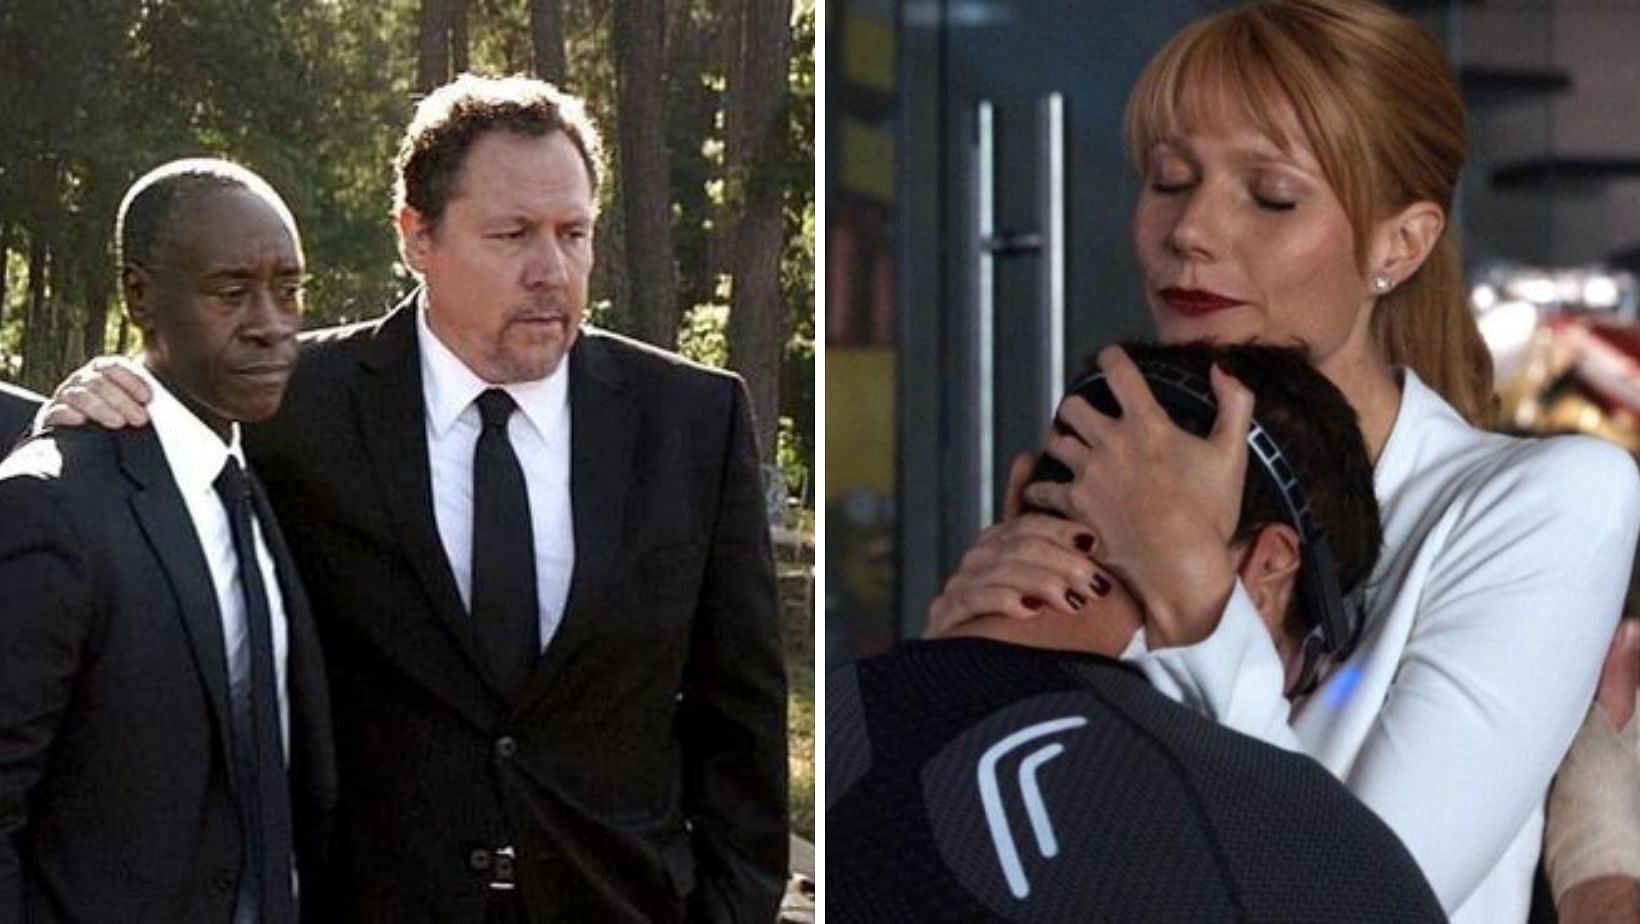 From Pepper Potts to Happy Hogan, the supporting cast is just as important as the main character in the franchise (Image via Marvel Studios)